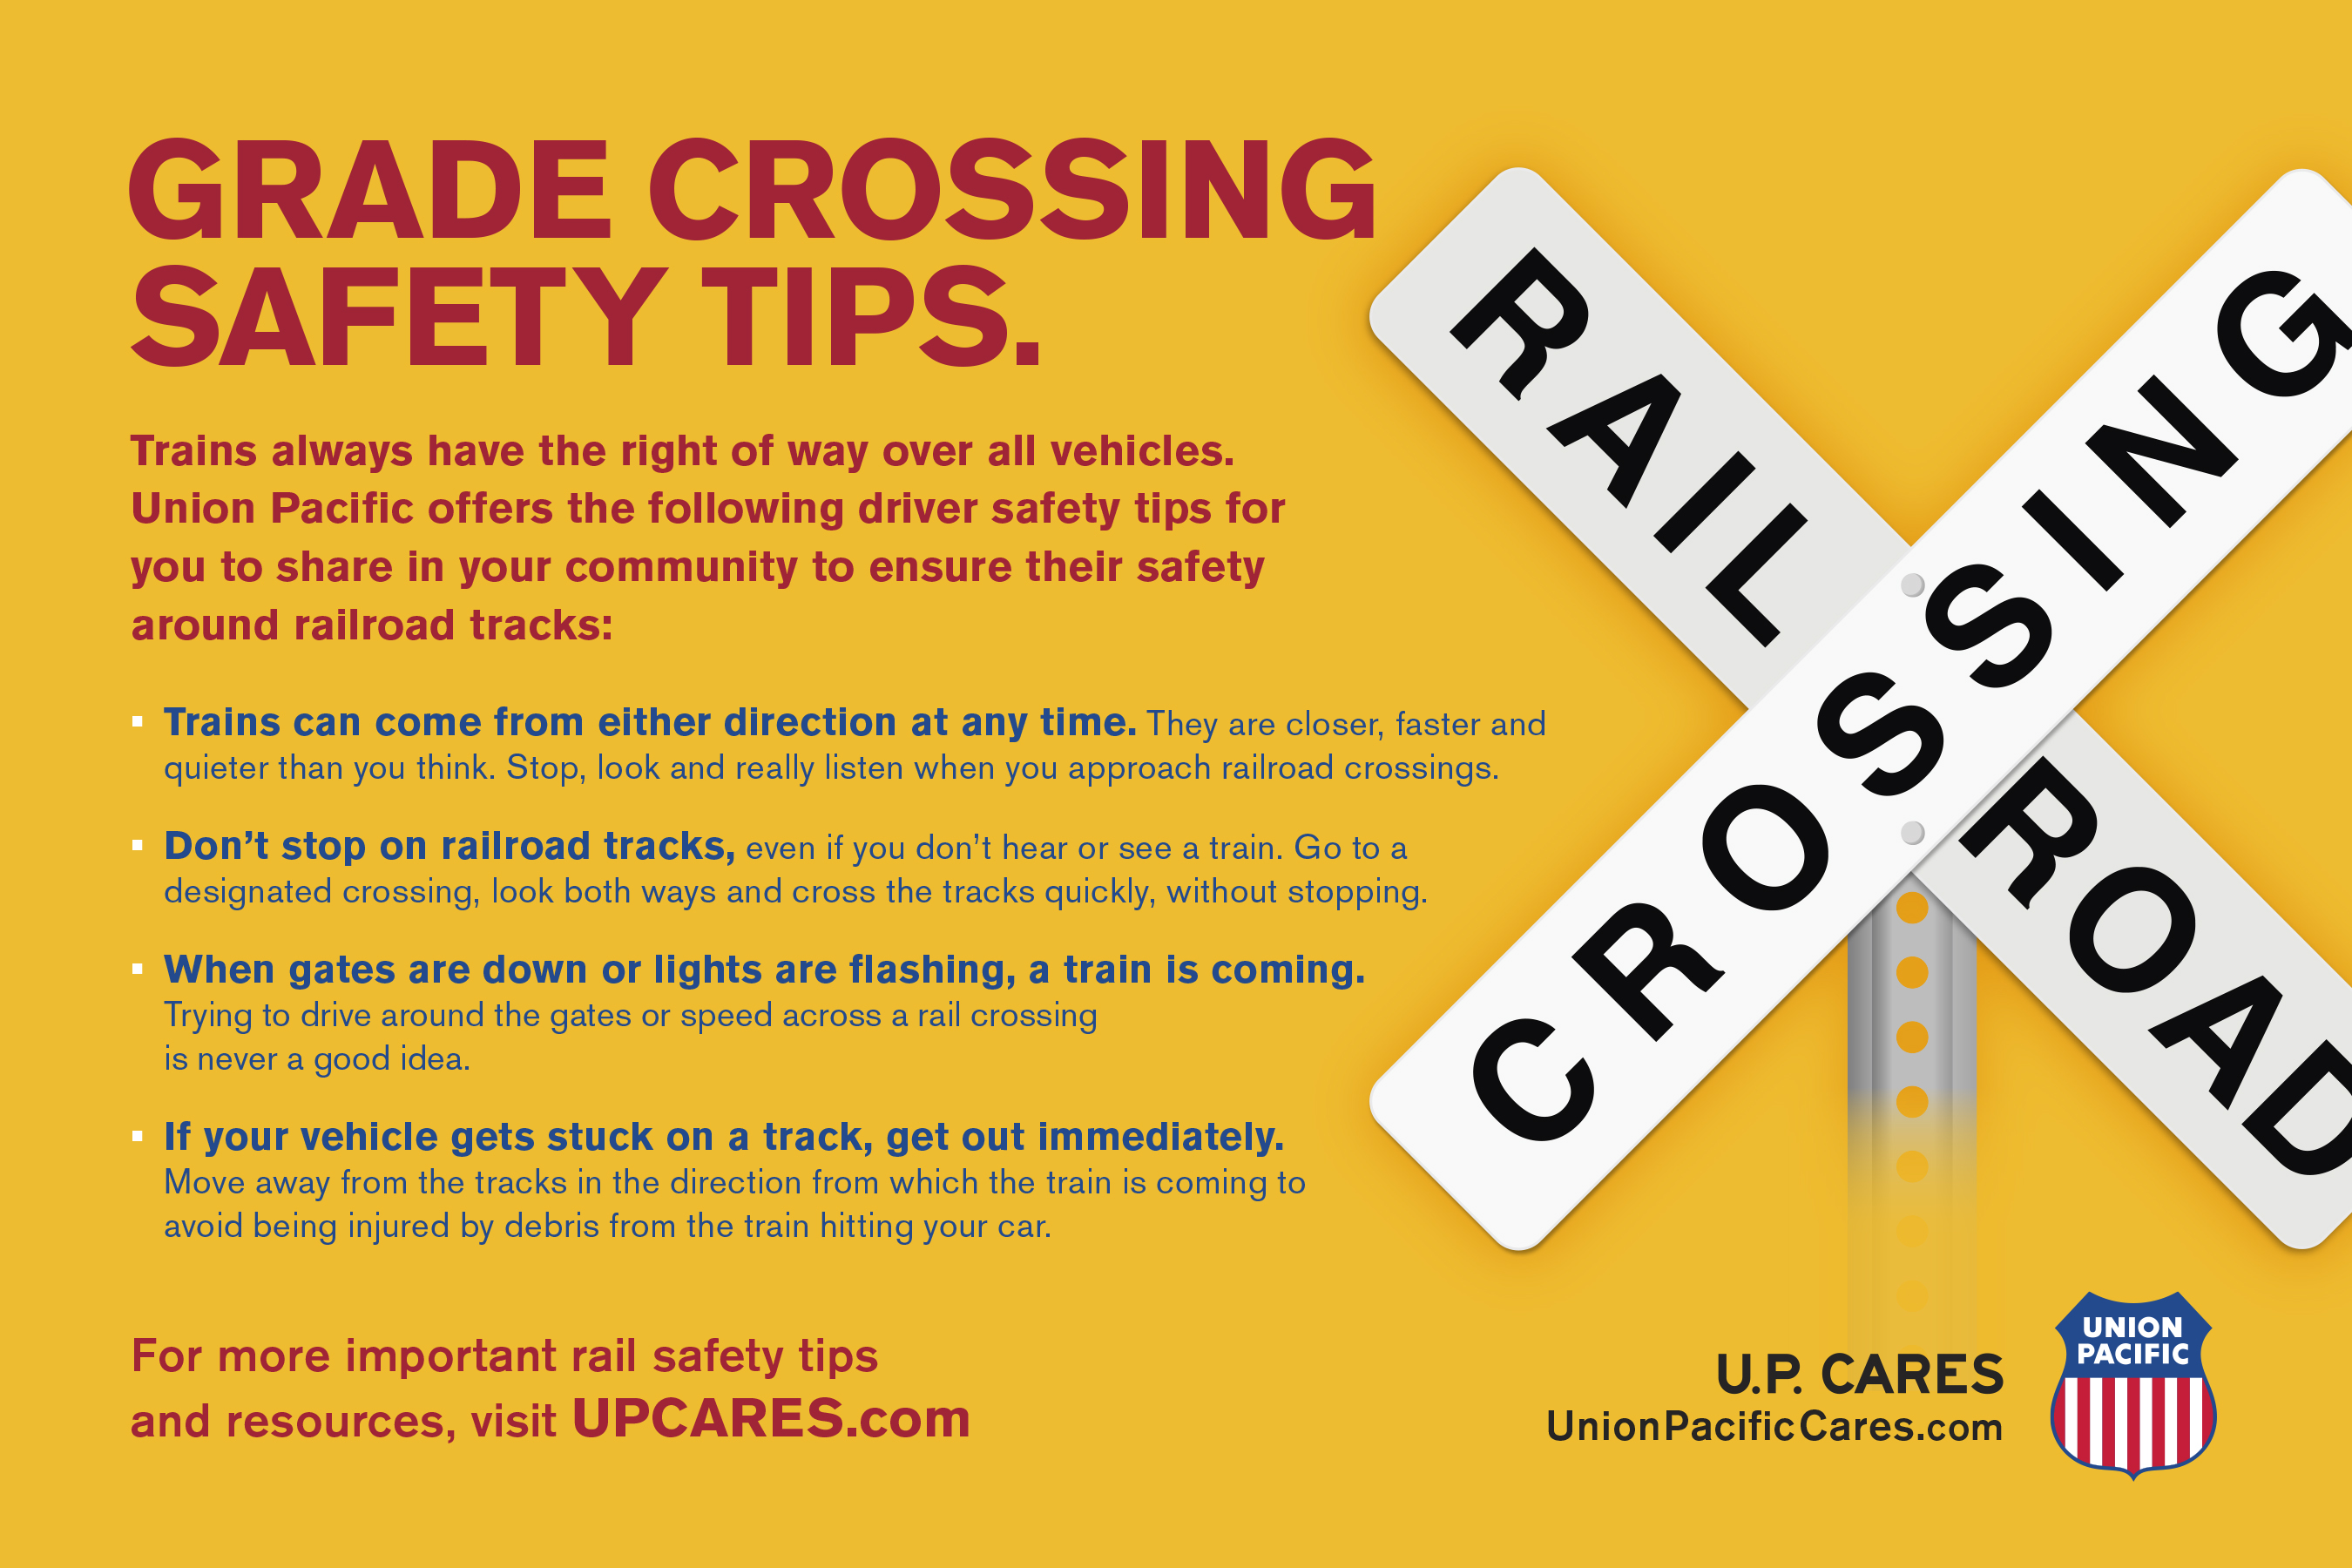 Railroad crossing safety tips